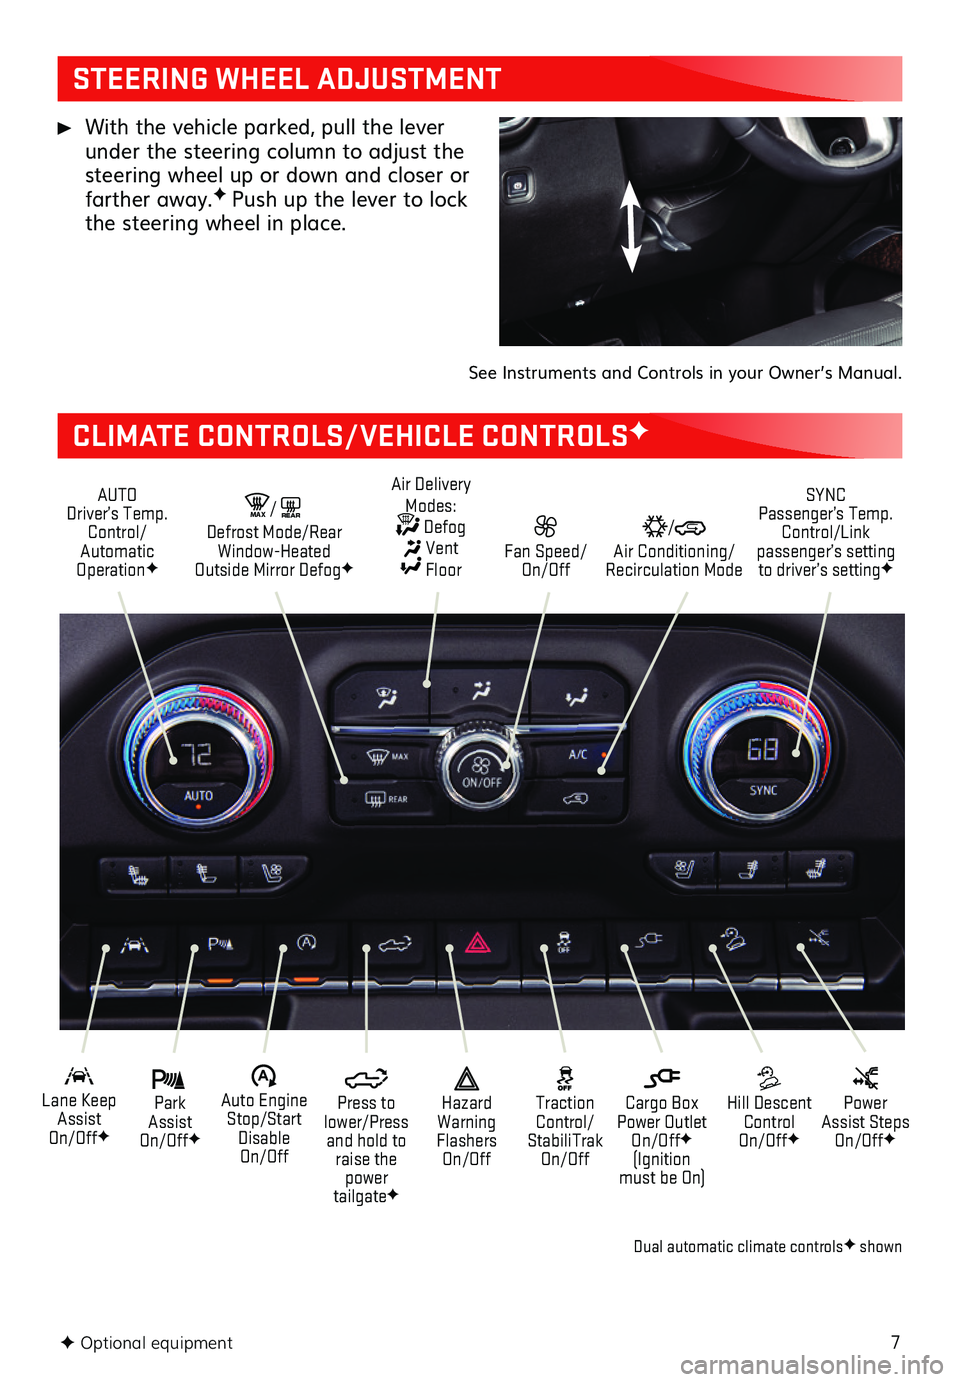 GMC SIERRA 2019  Get To Know Guide 7F Optional equipment  
STEERING WHEEL ADJUSTMENT
CLIMATE CONTROLS/VEHICLE CONTROLSF
 With the vehicle parked, pull the lever under the steering column to adjust the steering wheel up or down and clos